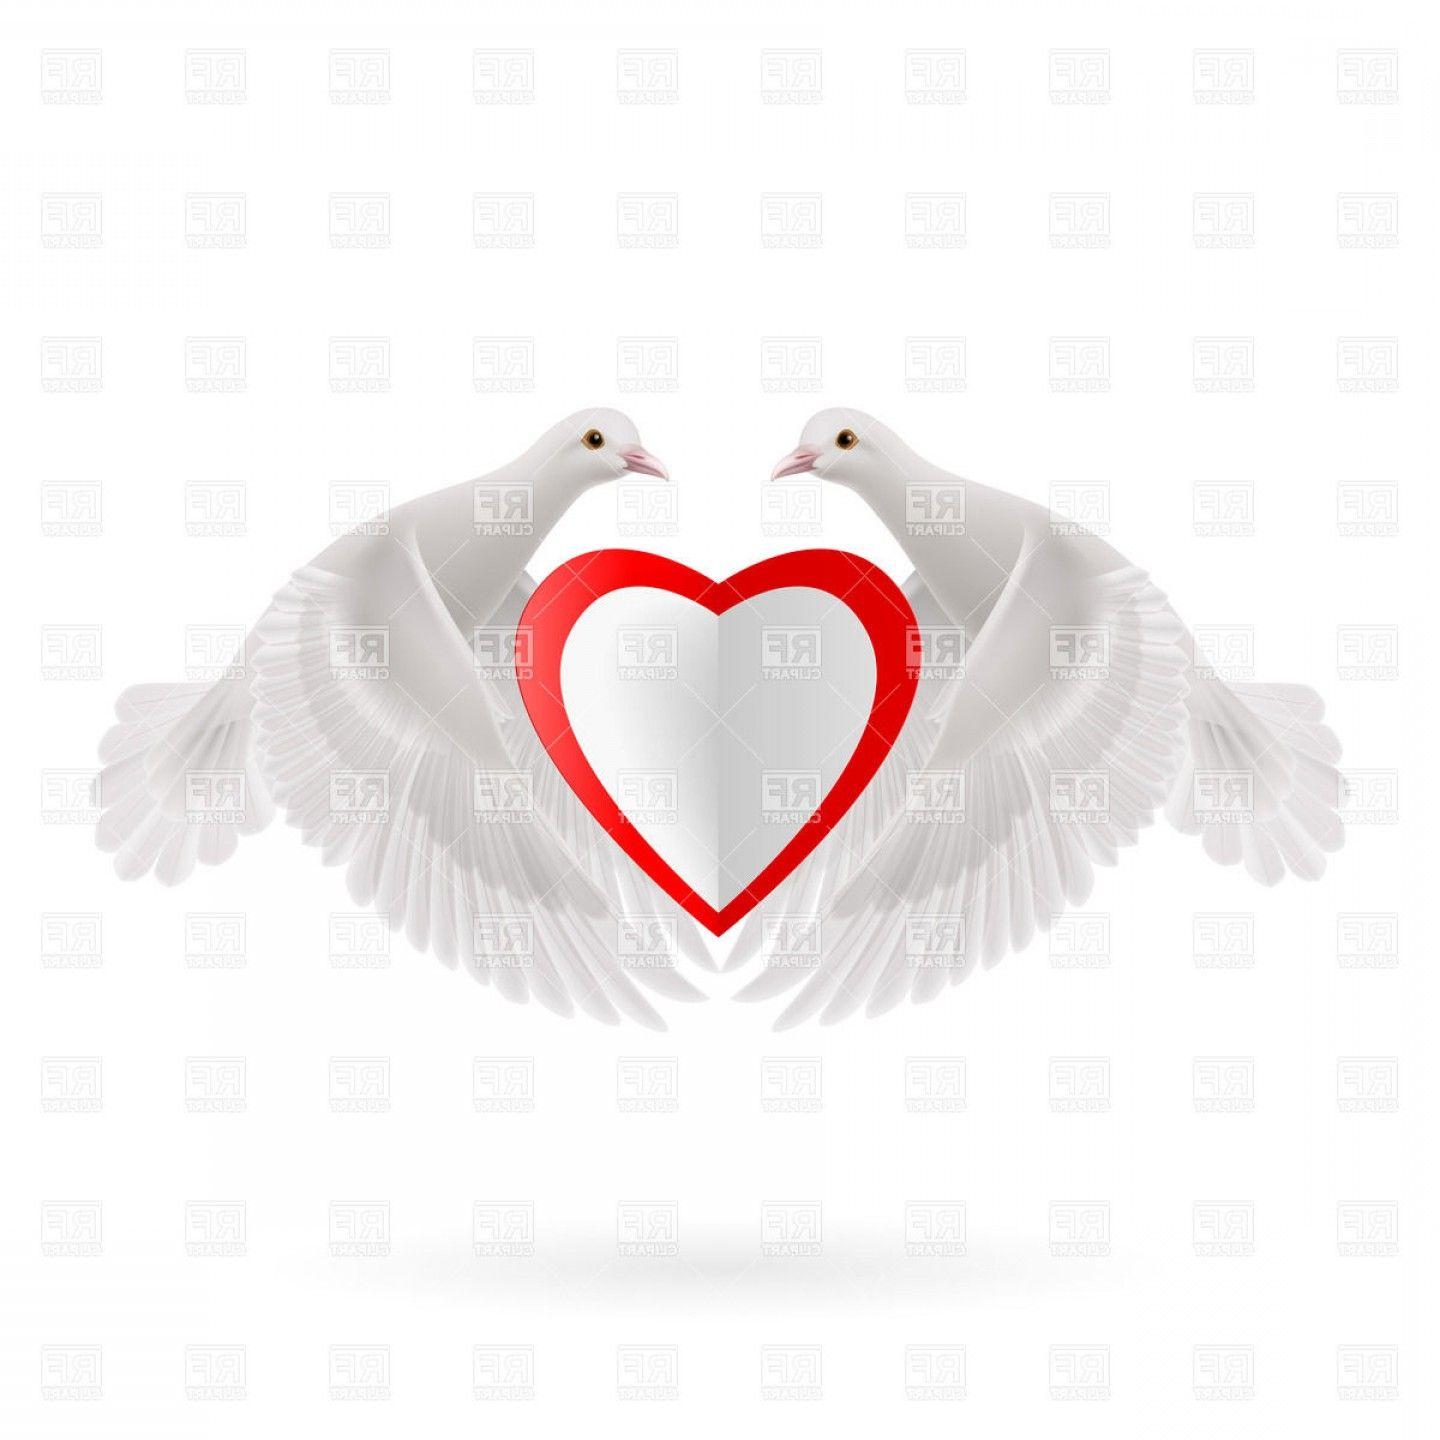 Red White Heart Logo - White Heart With Red Edging Between Two Doves Vector Clipart